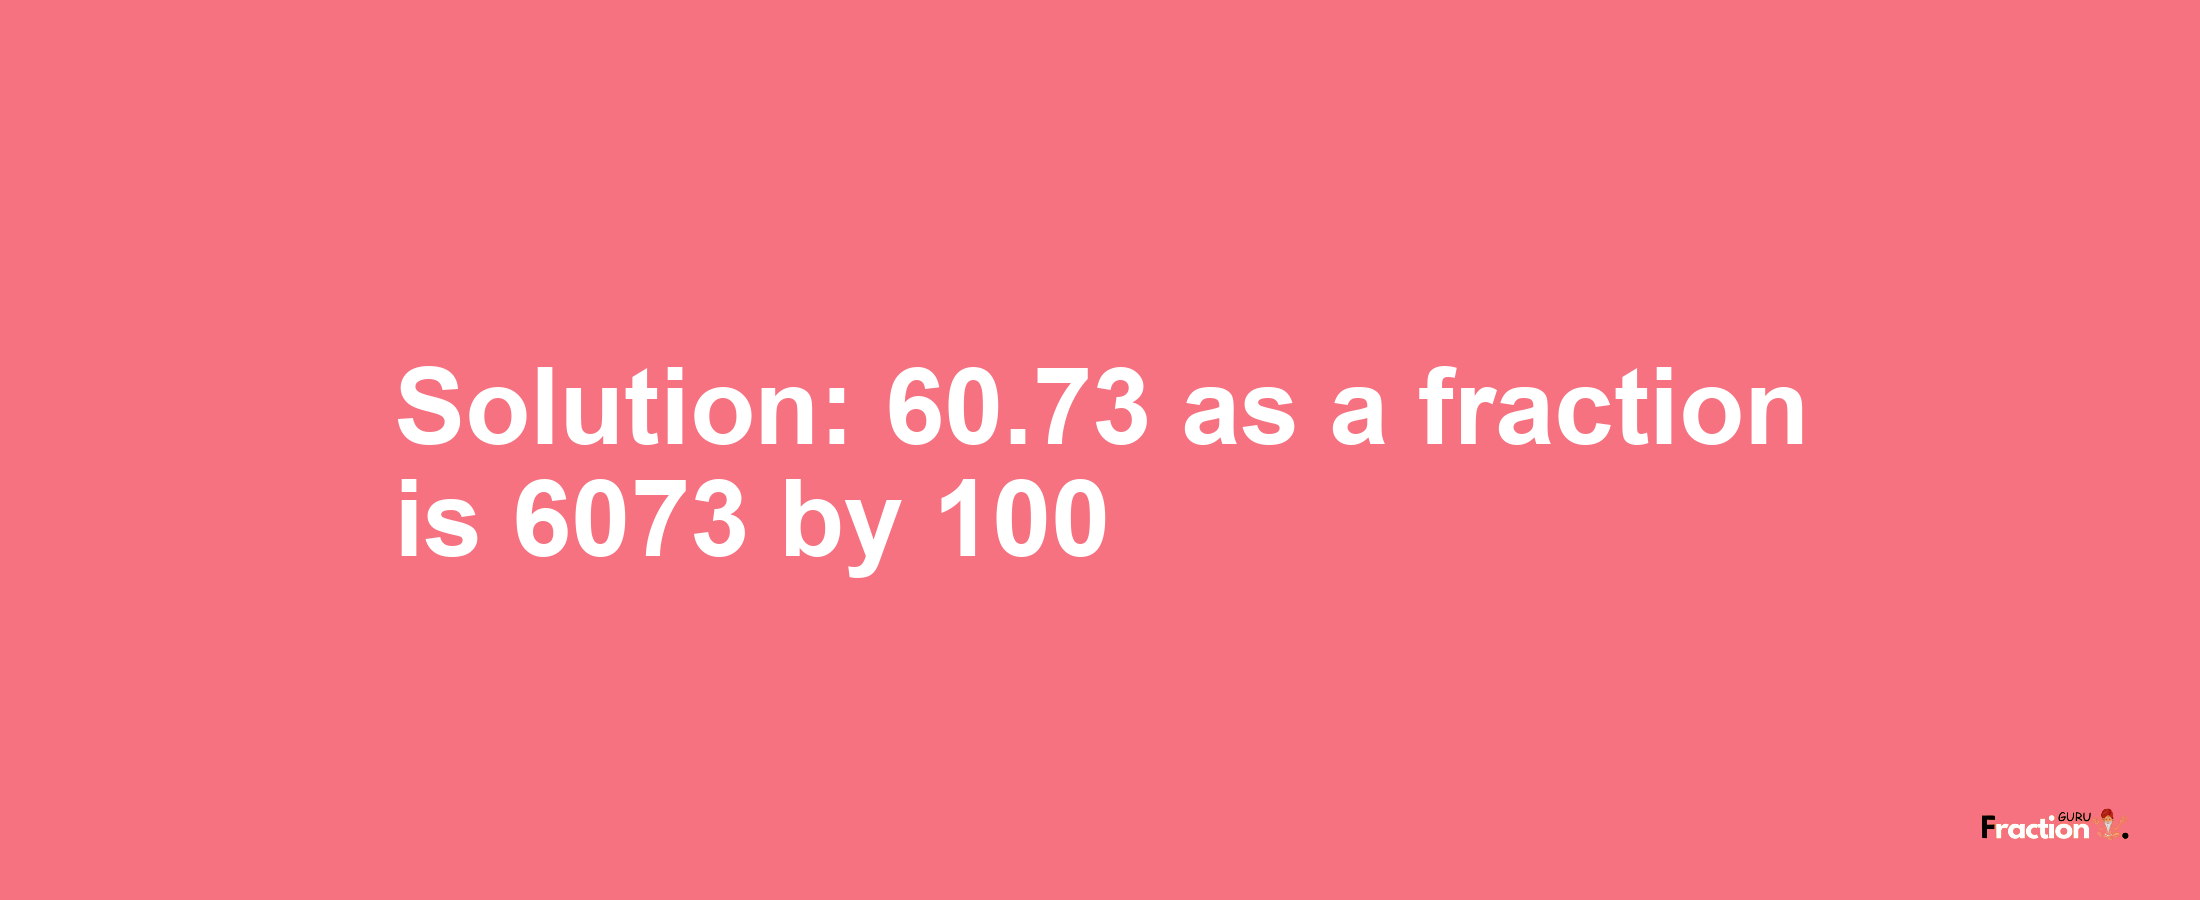 Solution:60.73 as a fraction is 6073/100